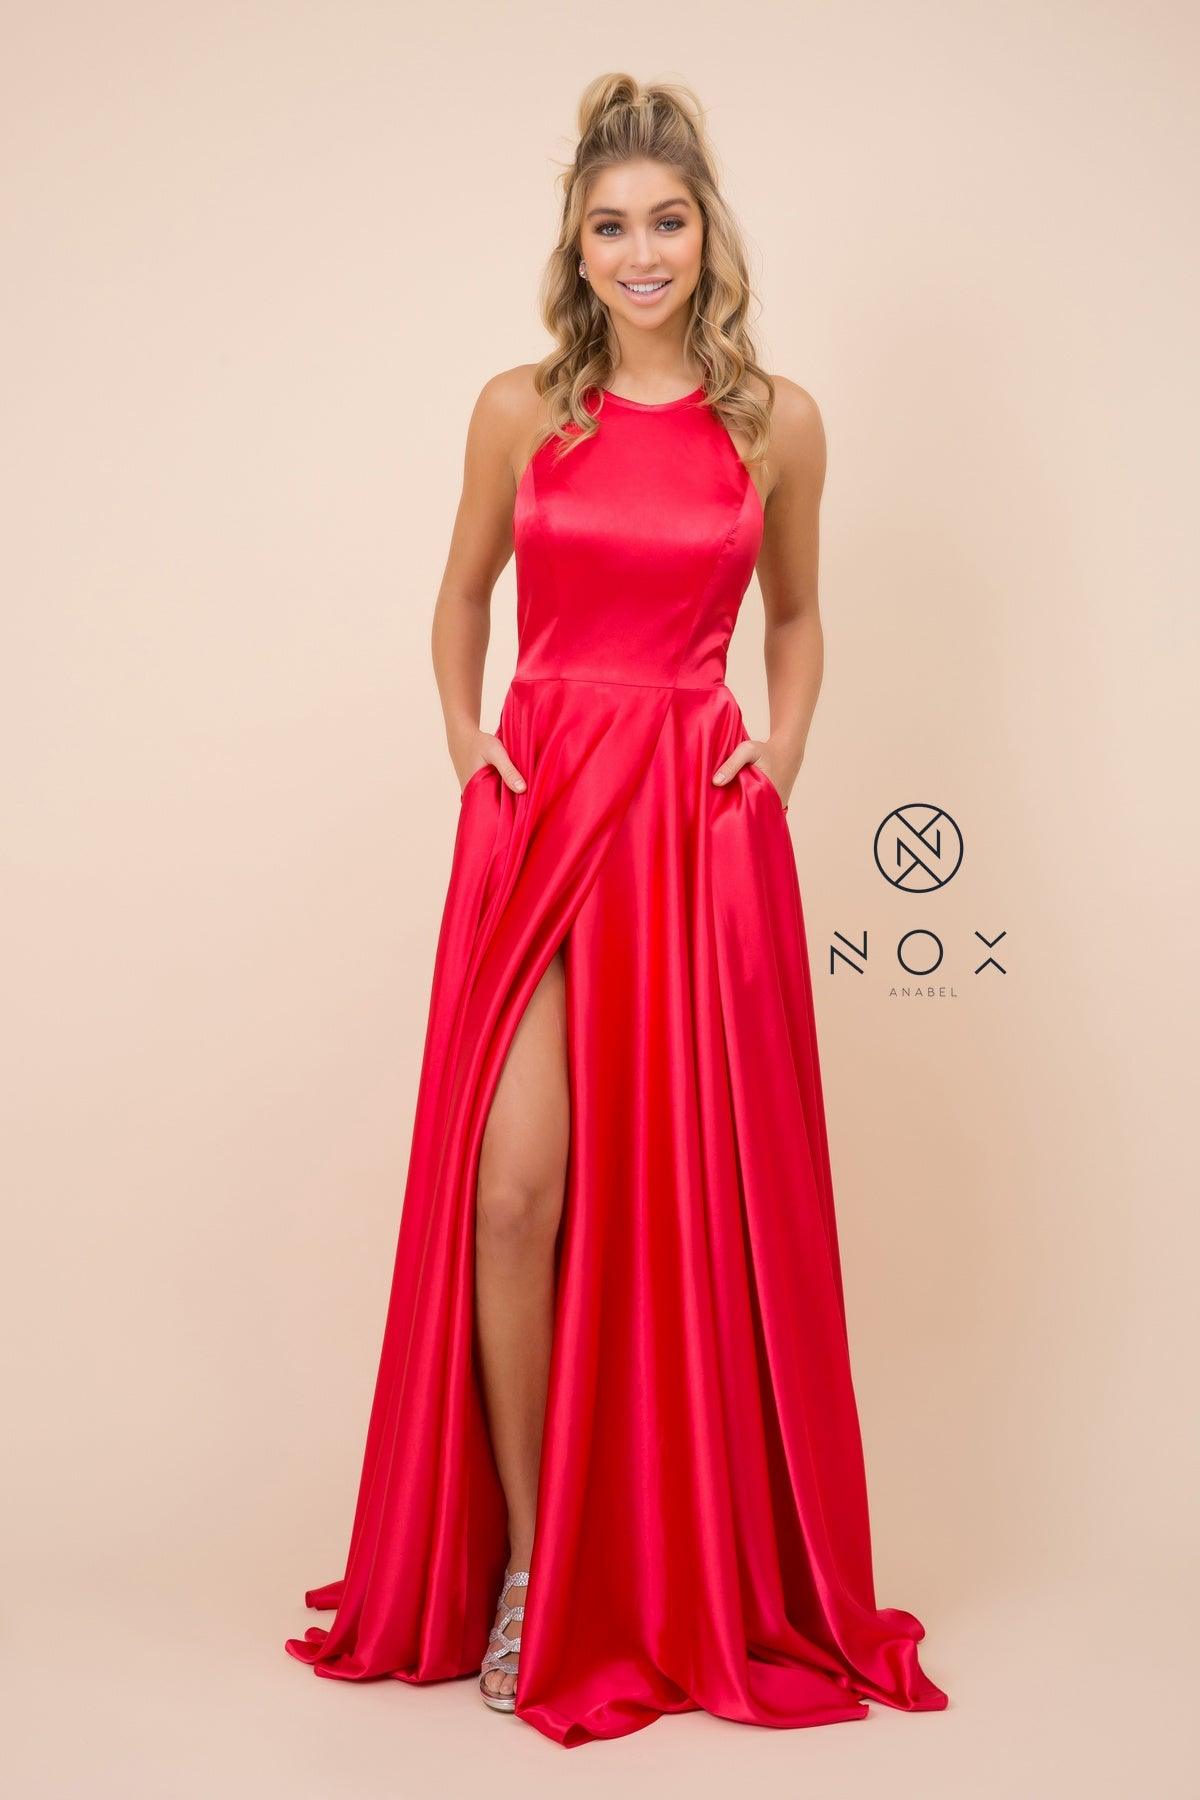 Long Open Back Formal Prom Dress Evening Gown Pockets - The Dress Outlet Nox Anabel